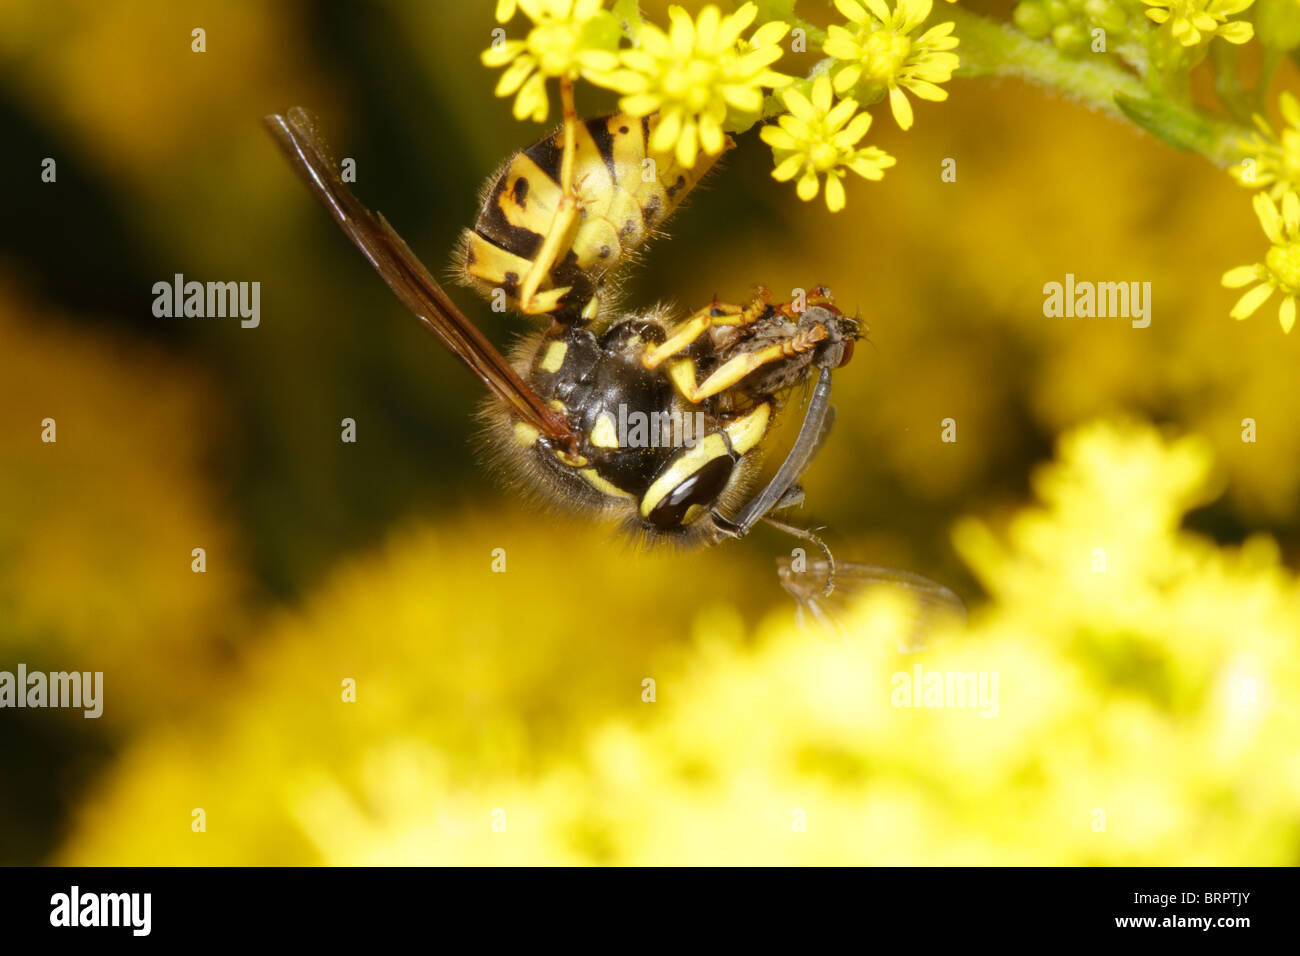 Vespula vulgaris, the common wasp, preying on a fly. Stock Photo